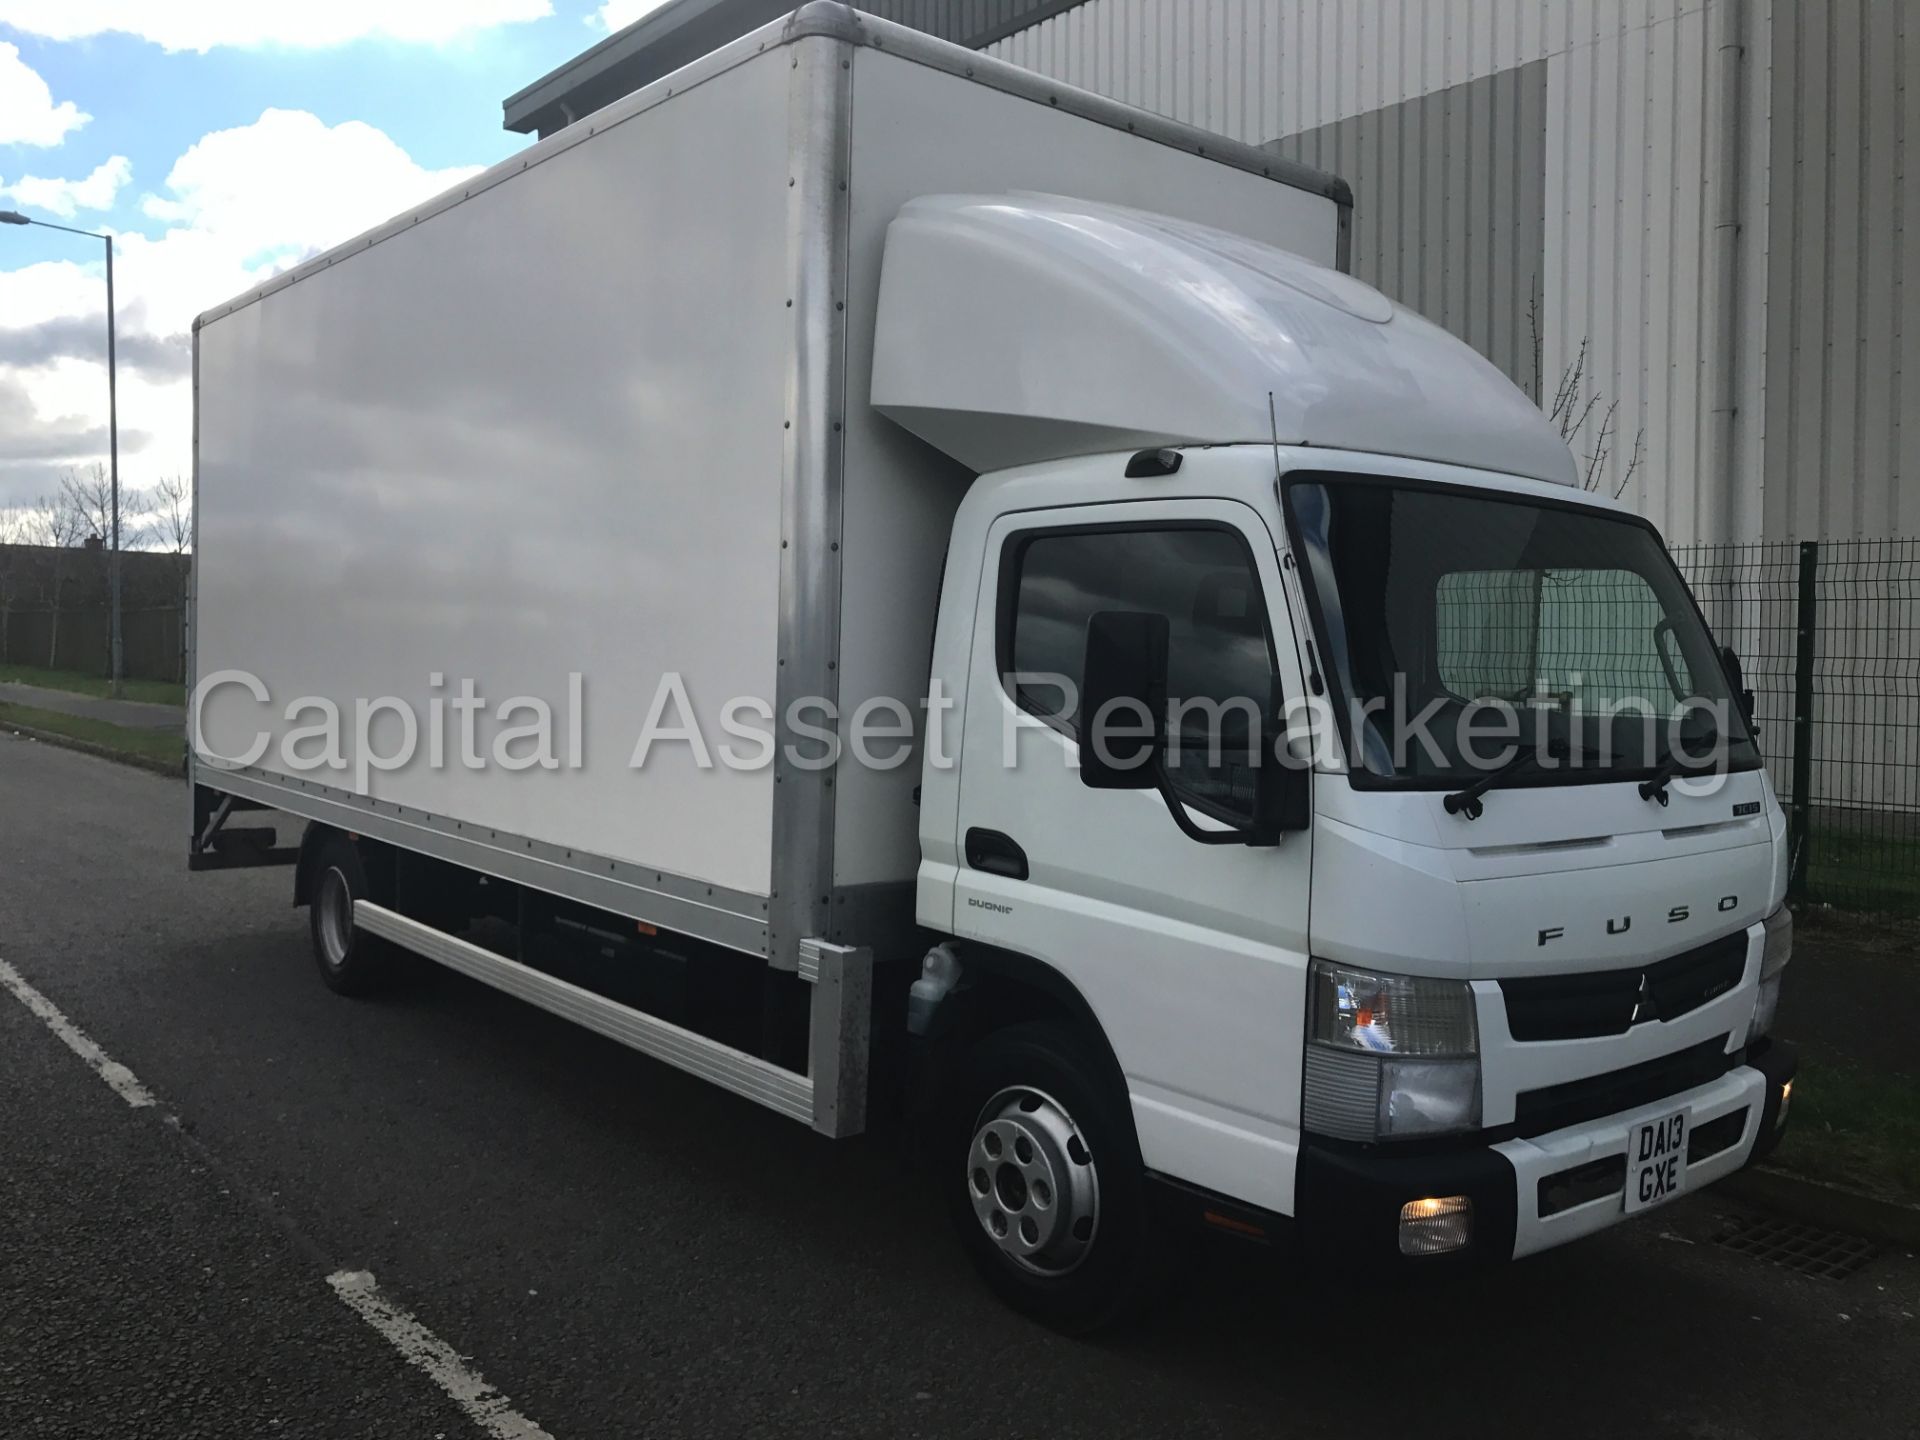 MITSUBISHI FUSO CANTER 7C15 - 7500KG GROSS - 1 OWNER - 13 REG - LOW MILEAGE - BOX VAN WITH TAIL LIFT